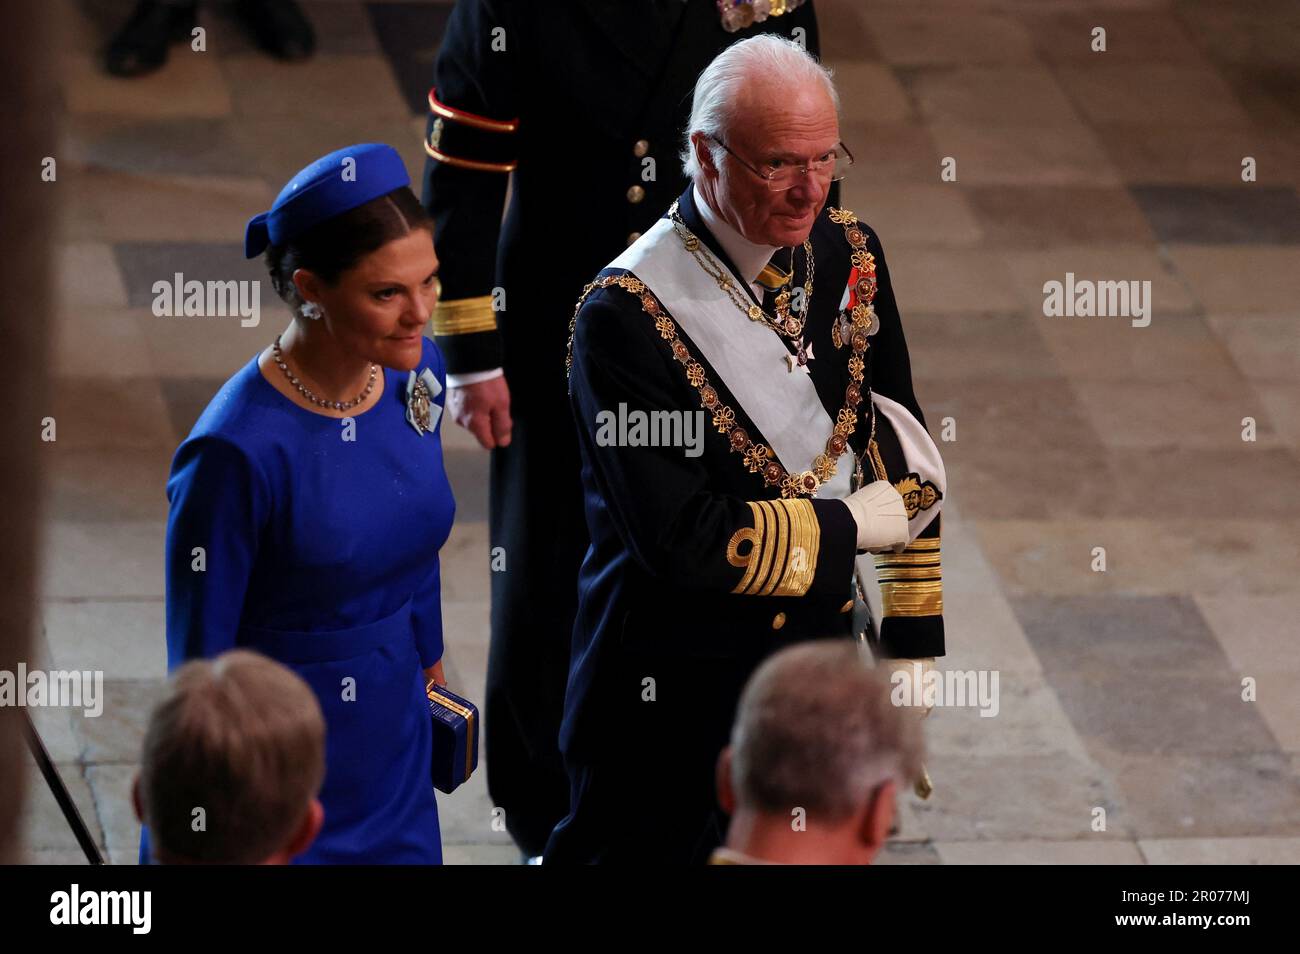 Sweden's King Carl Gustaf XVI and Crown Princess Victoria at the ...